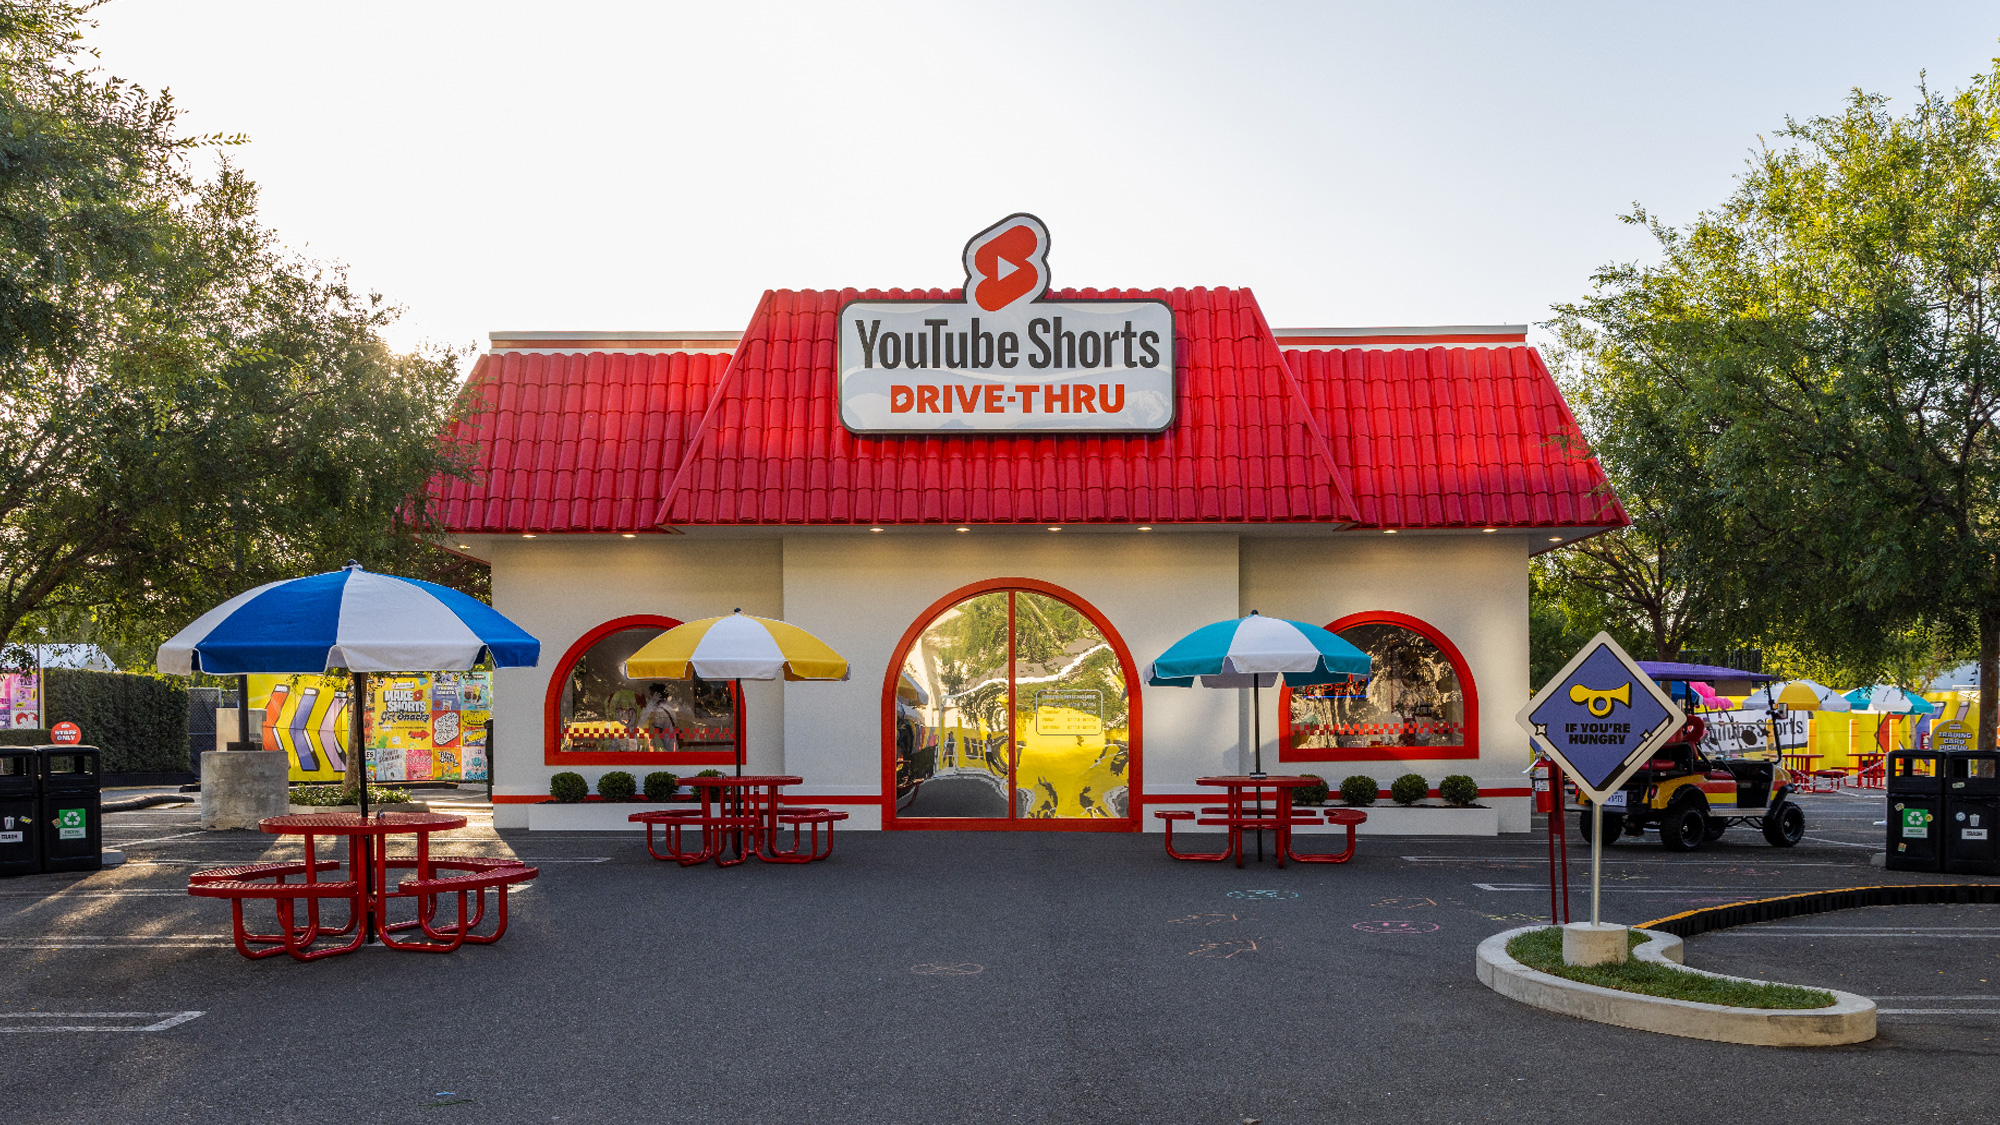 New Identity and Packaging for YouTube Shorts Drive-thru Activation